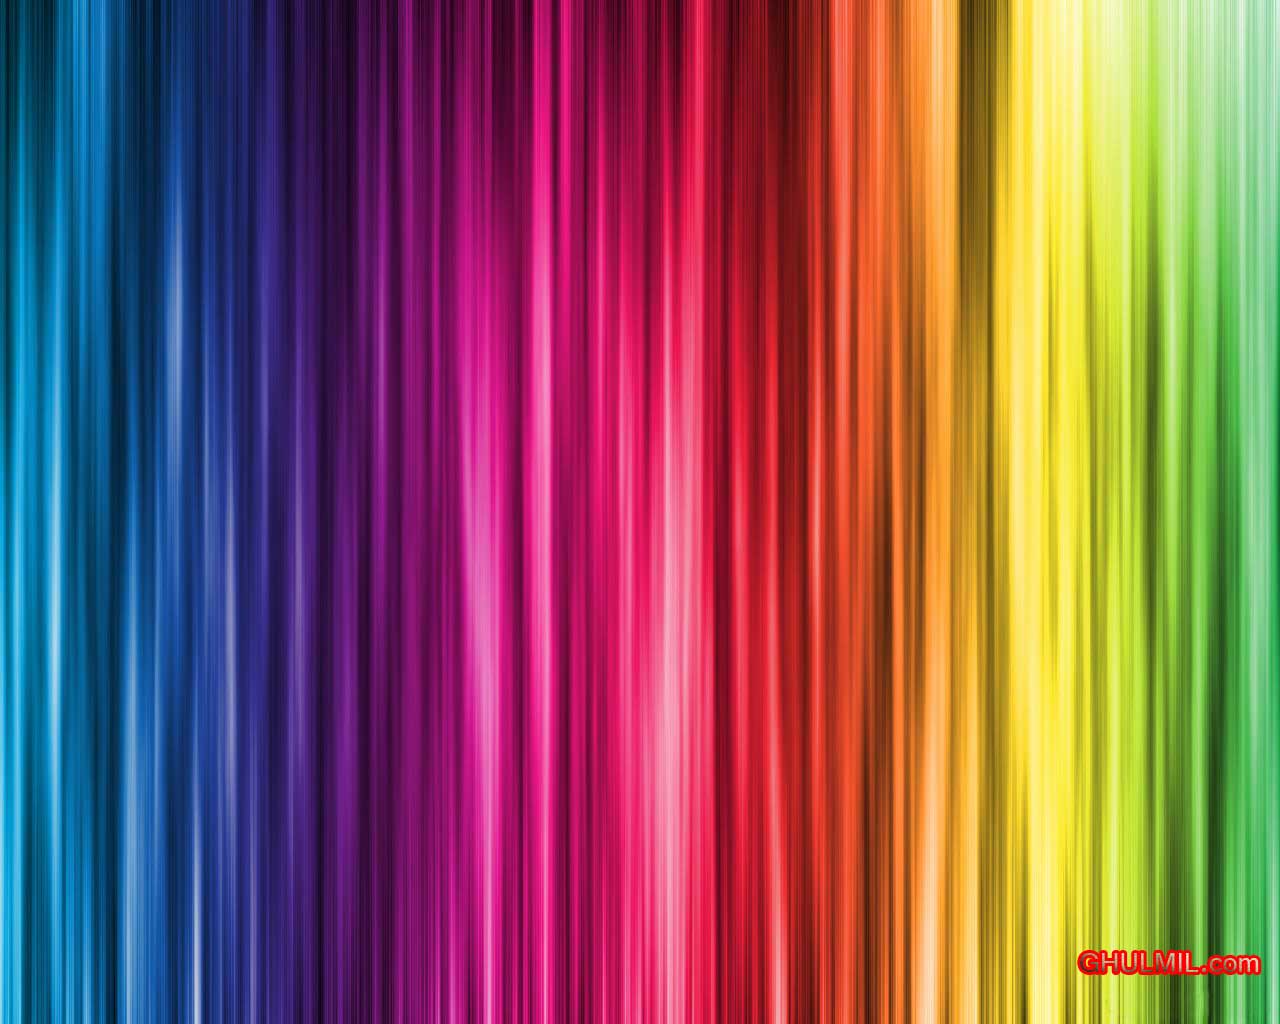  Colorful Background Wallpaper on this Colorful Background Wallpapers 1280x1024